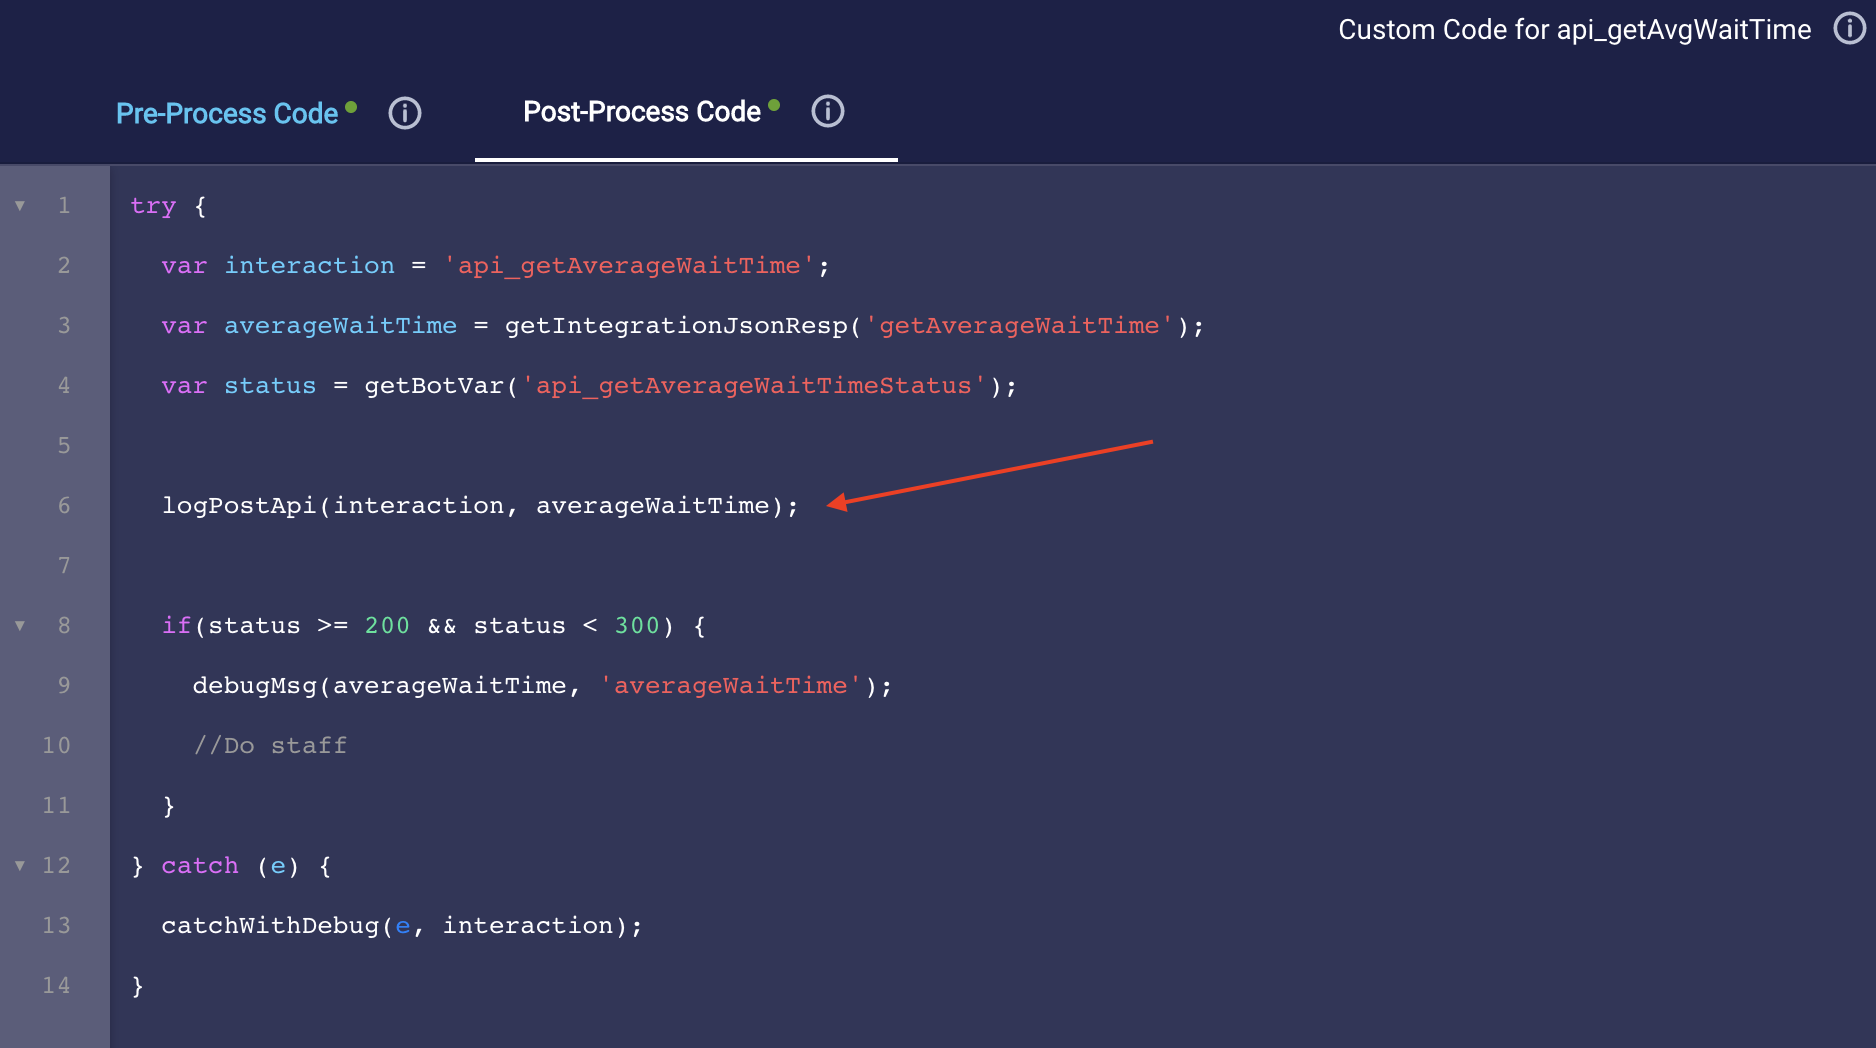 Example code in the Post-Process Code panel to save the full response